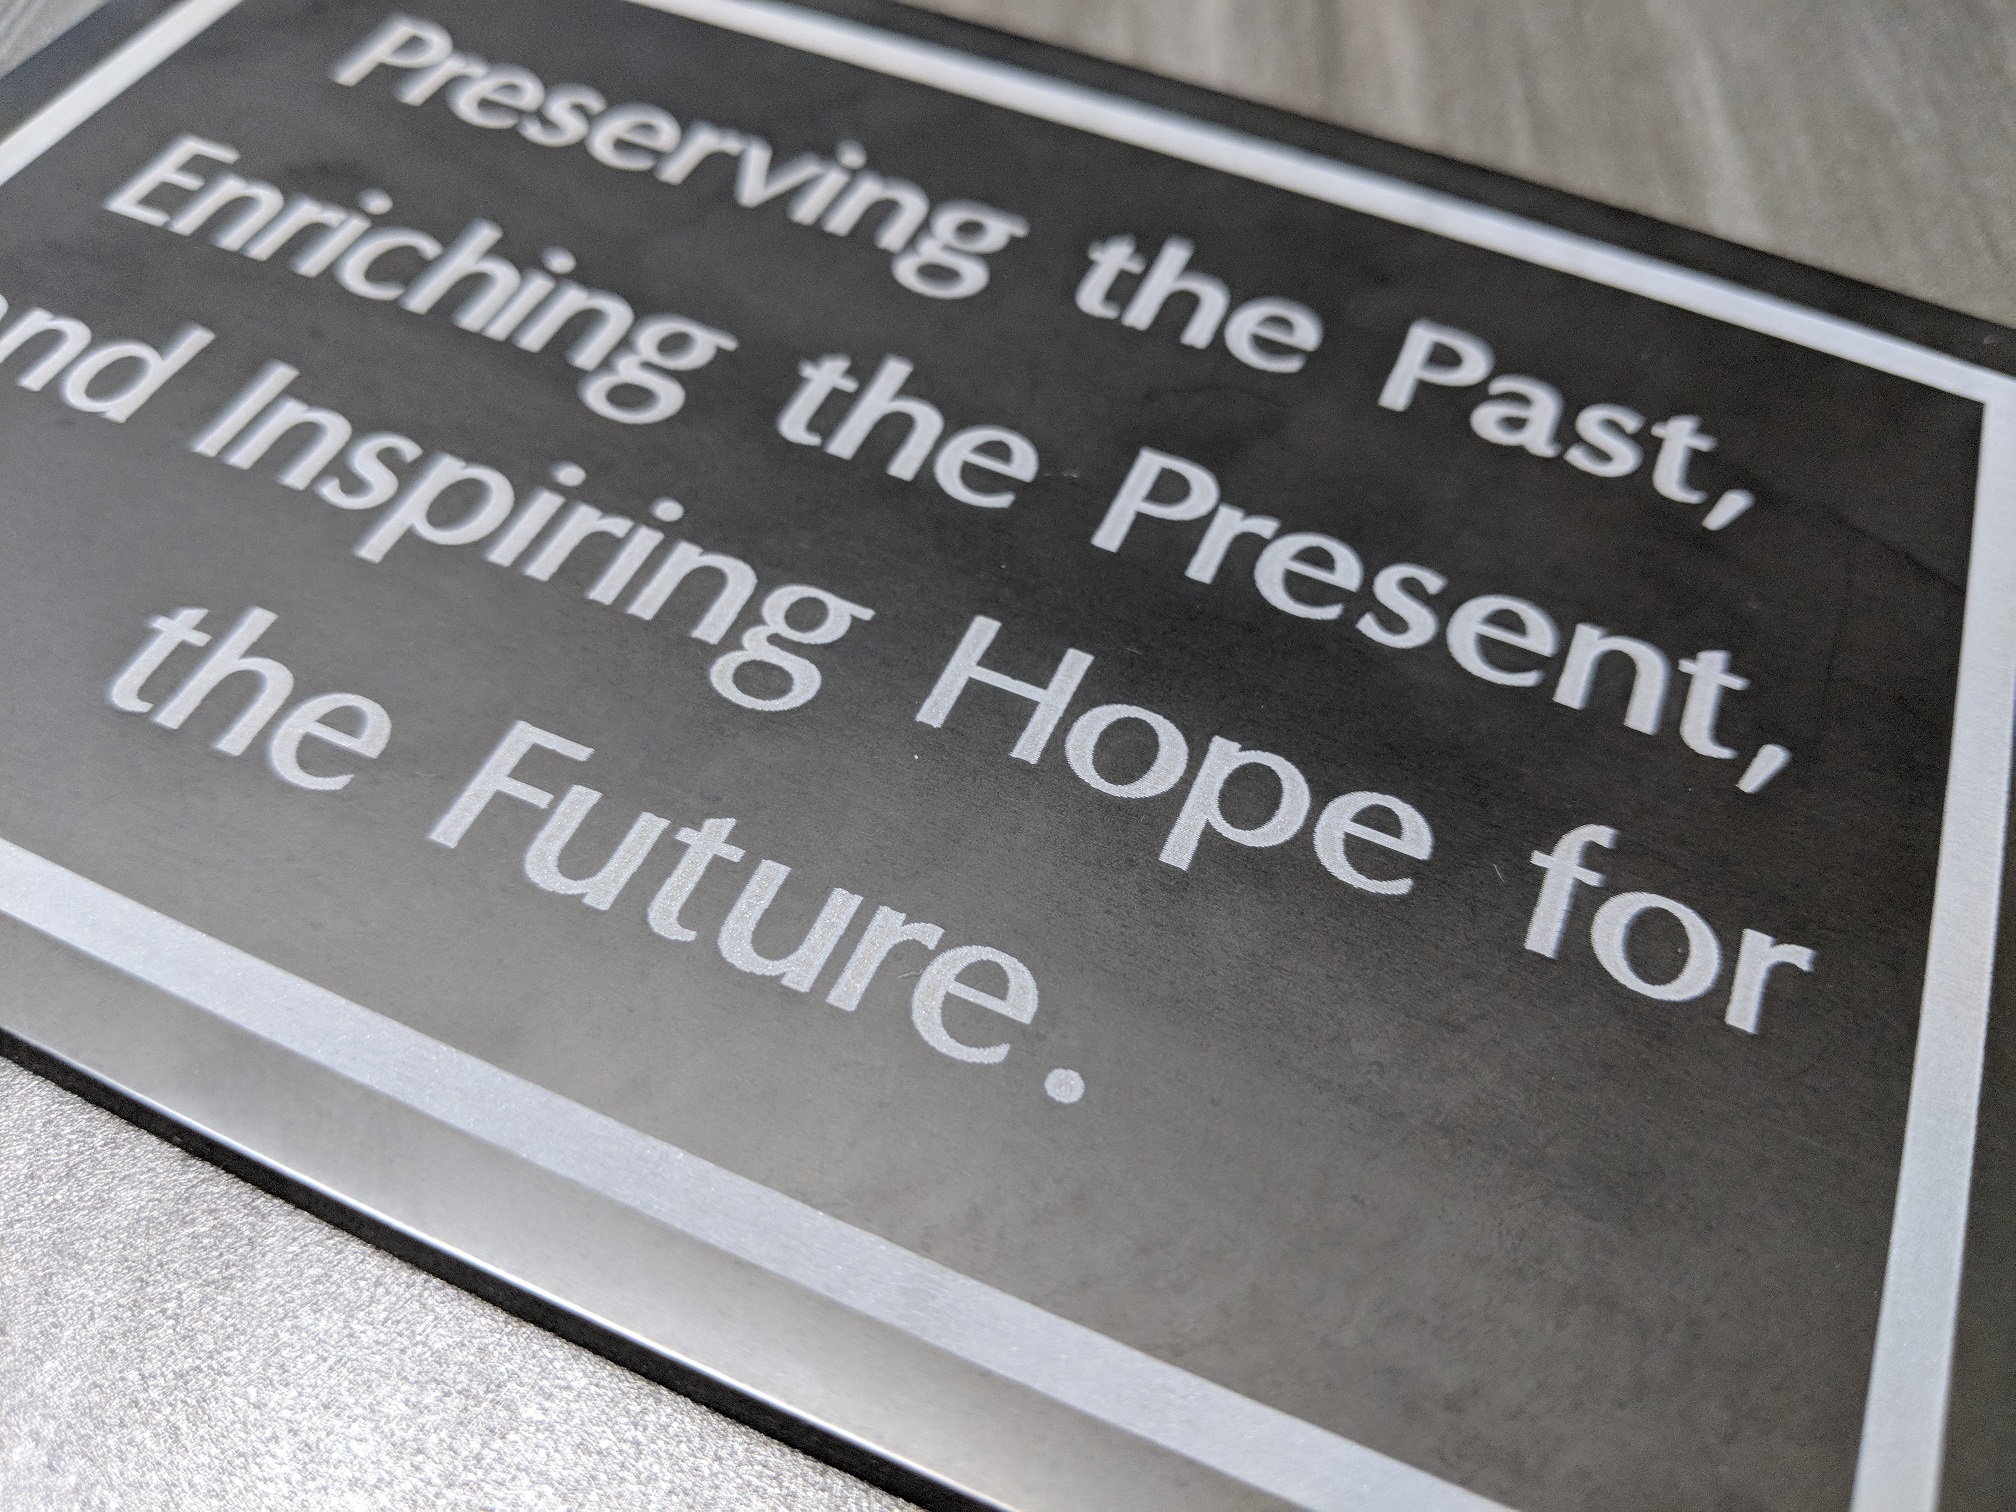 Preserving the Past, Enriching the Future